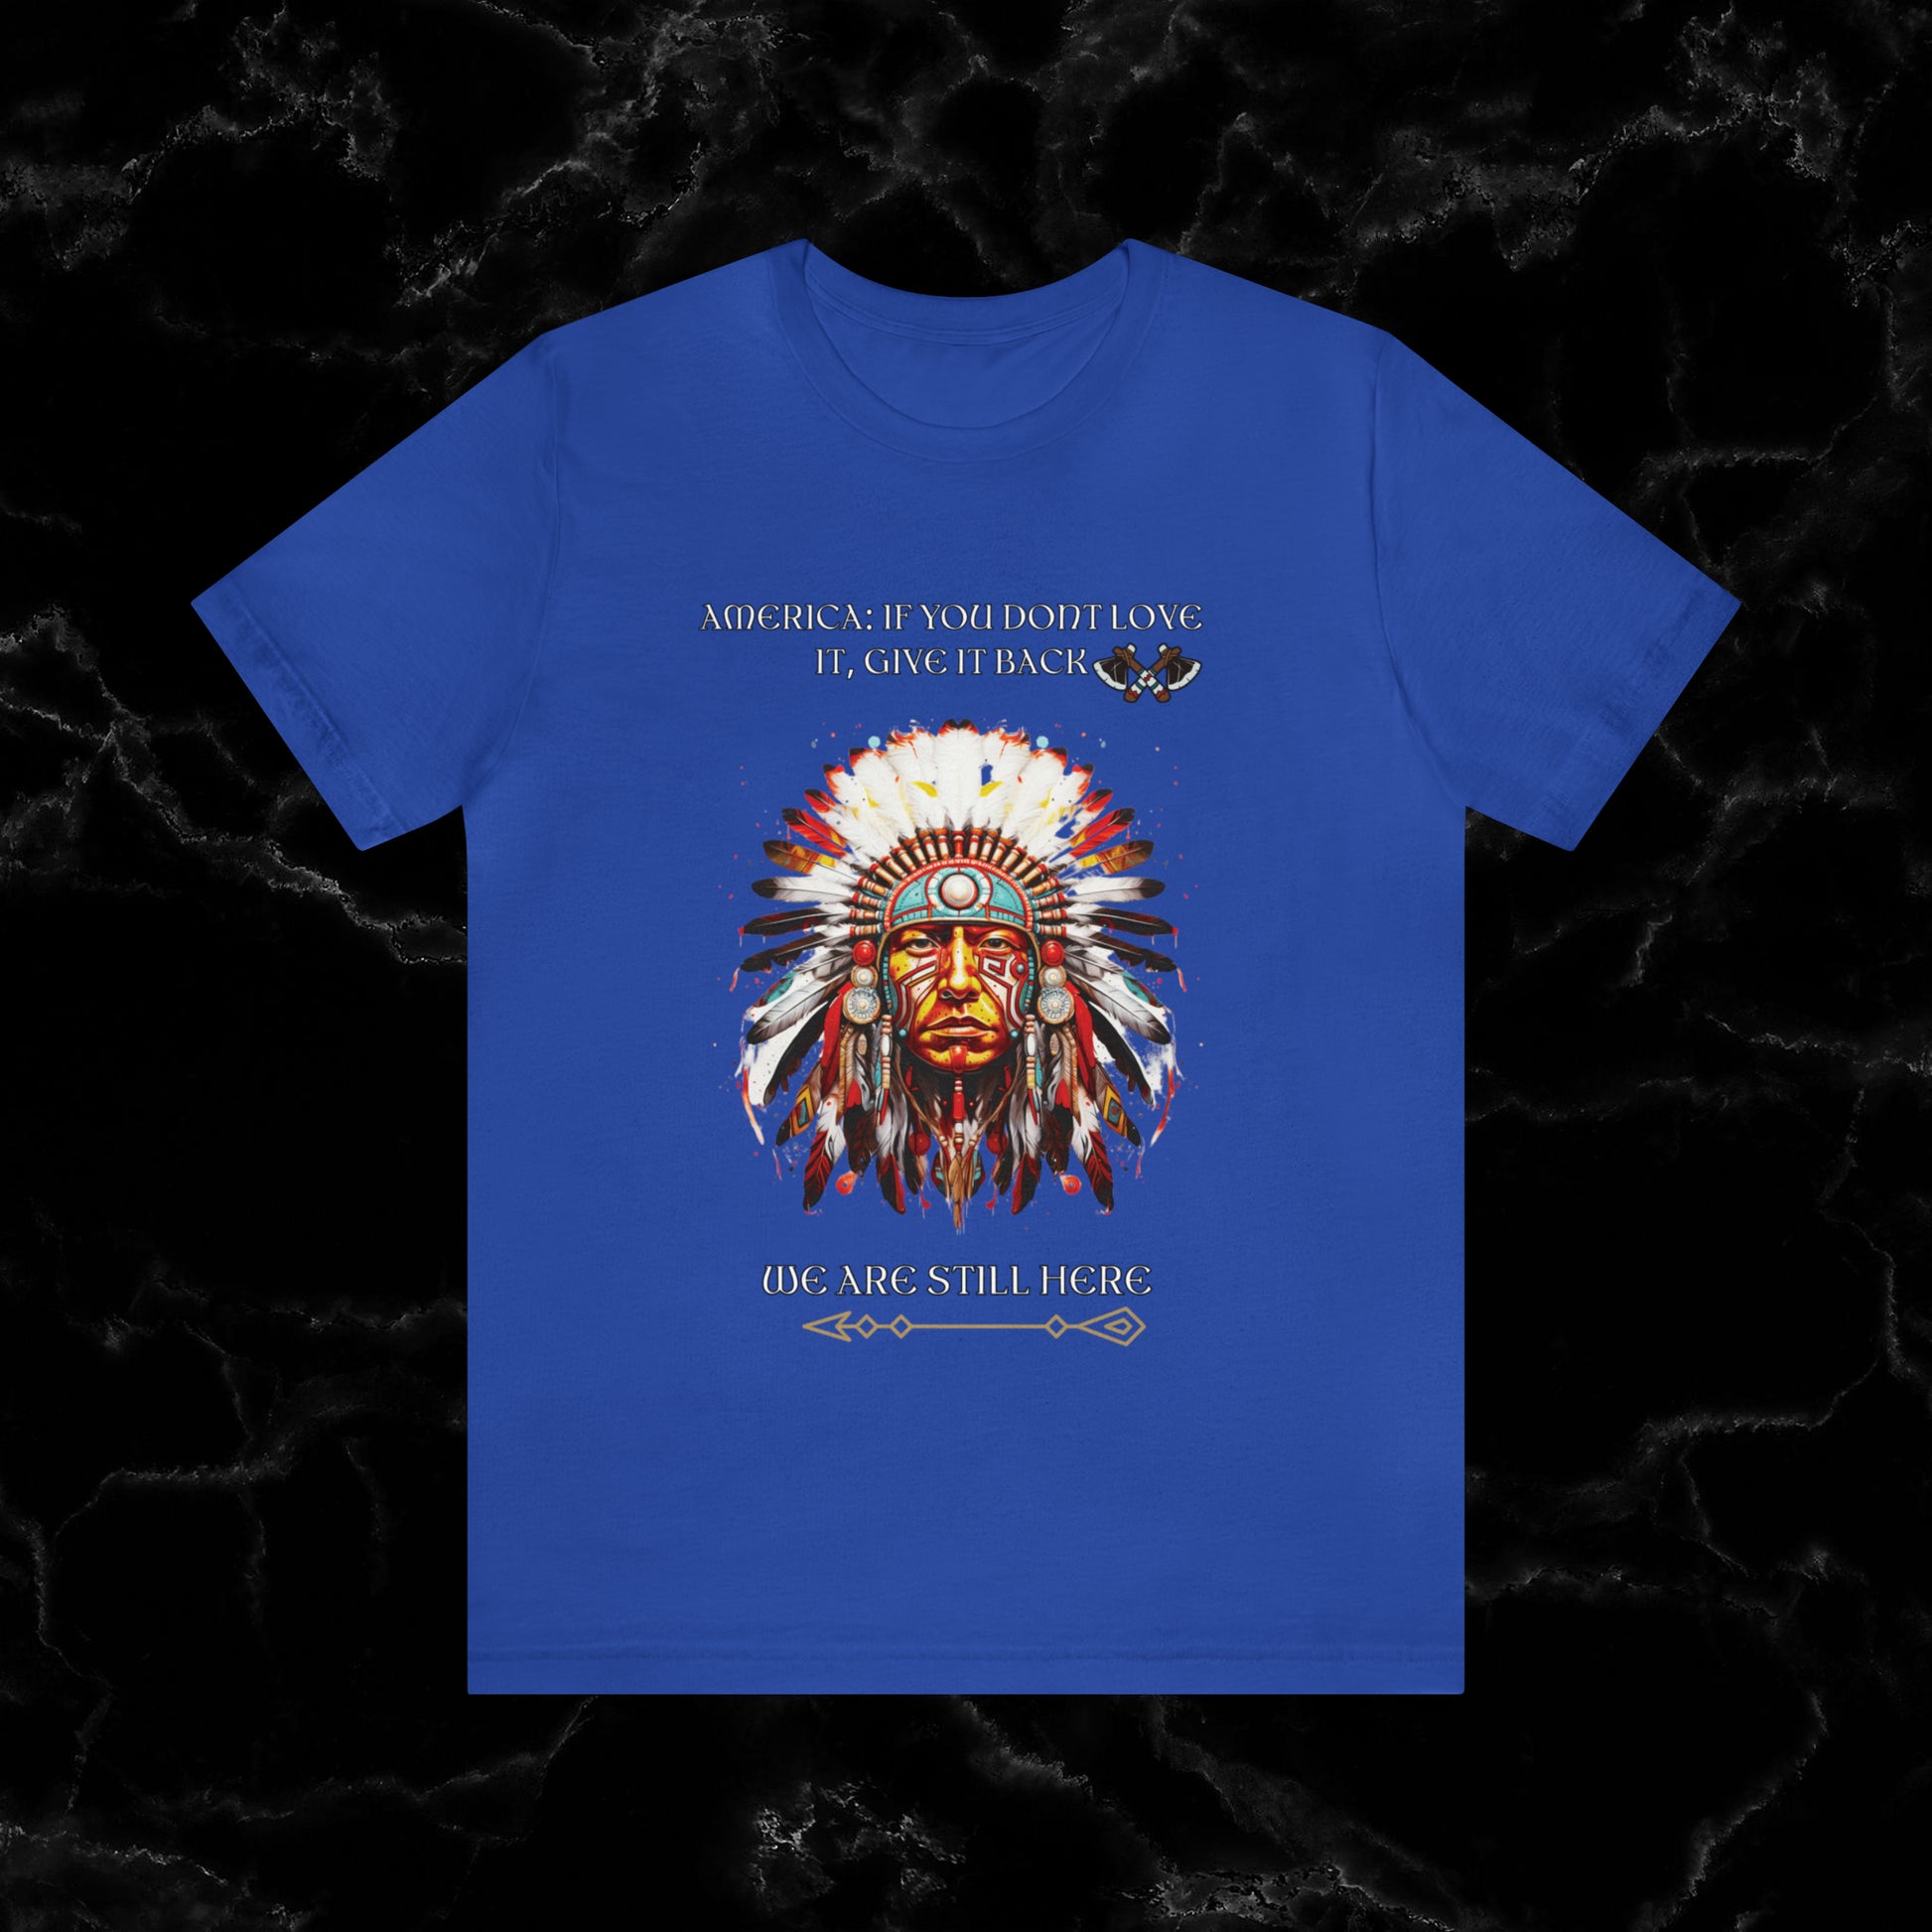 America Love it Or Give It Back Vintage T-Shirt - Indigenous Native Shirt T-Shirt True Royal S 